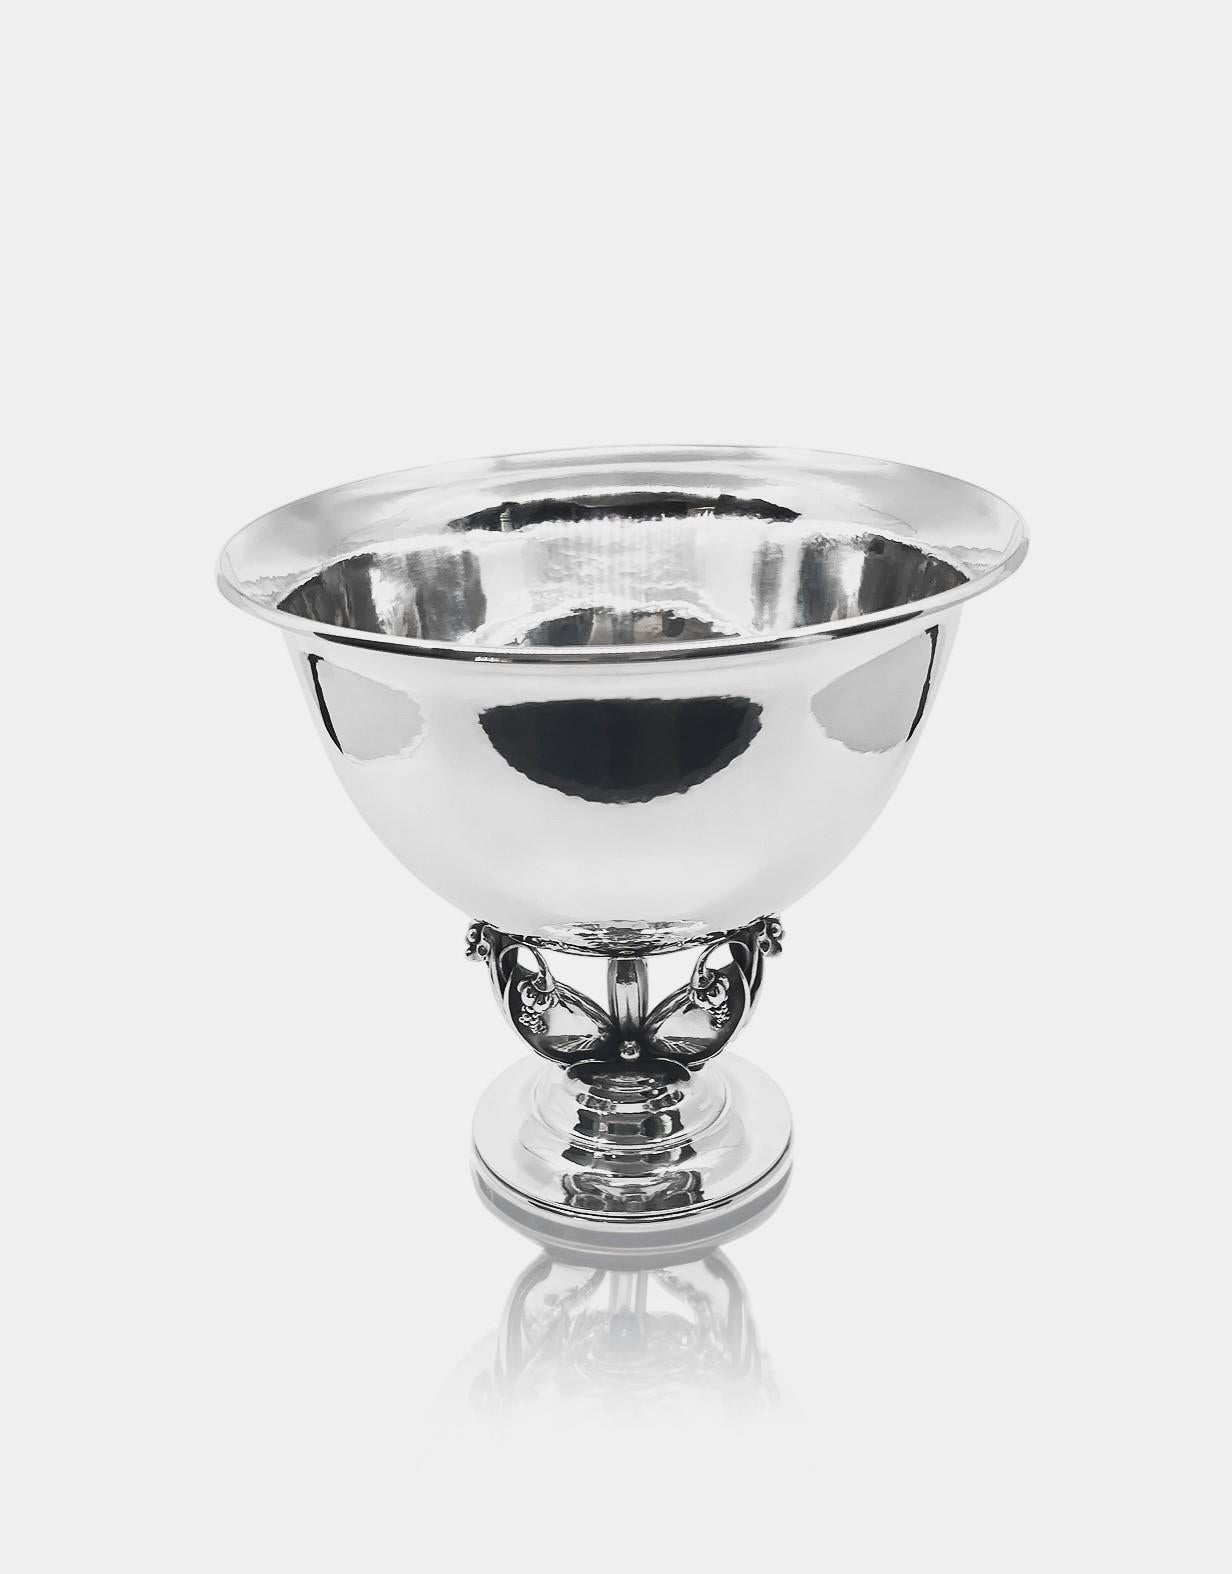 A large Georg Jensen sterling silver ornate grape bowl, design #468A by Gundorph Albertus from 1926. The bowl serves as a weighty centerpiece, elegantly poised on three delicate, leaf-shaped supports adorned with floral motifs. Each of these floral